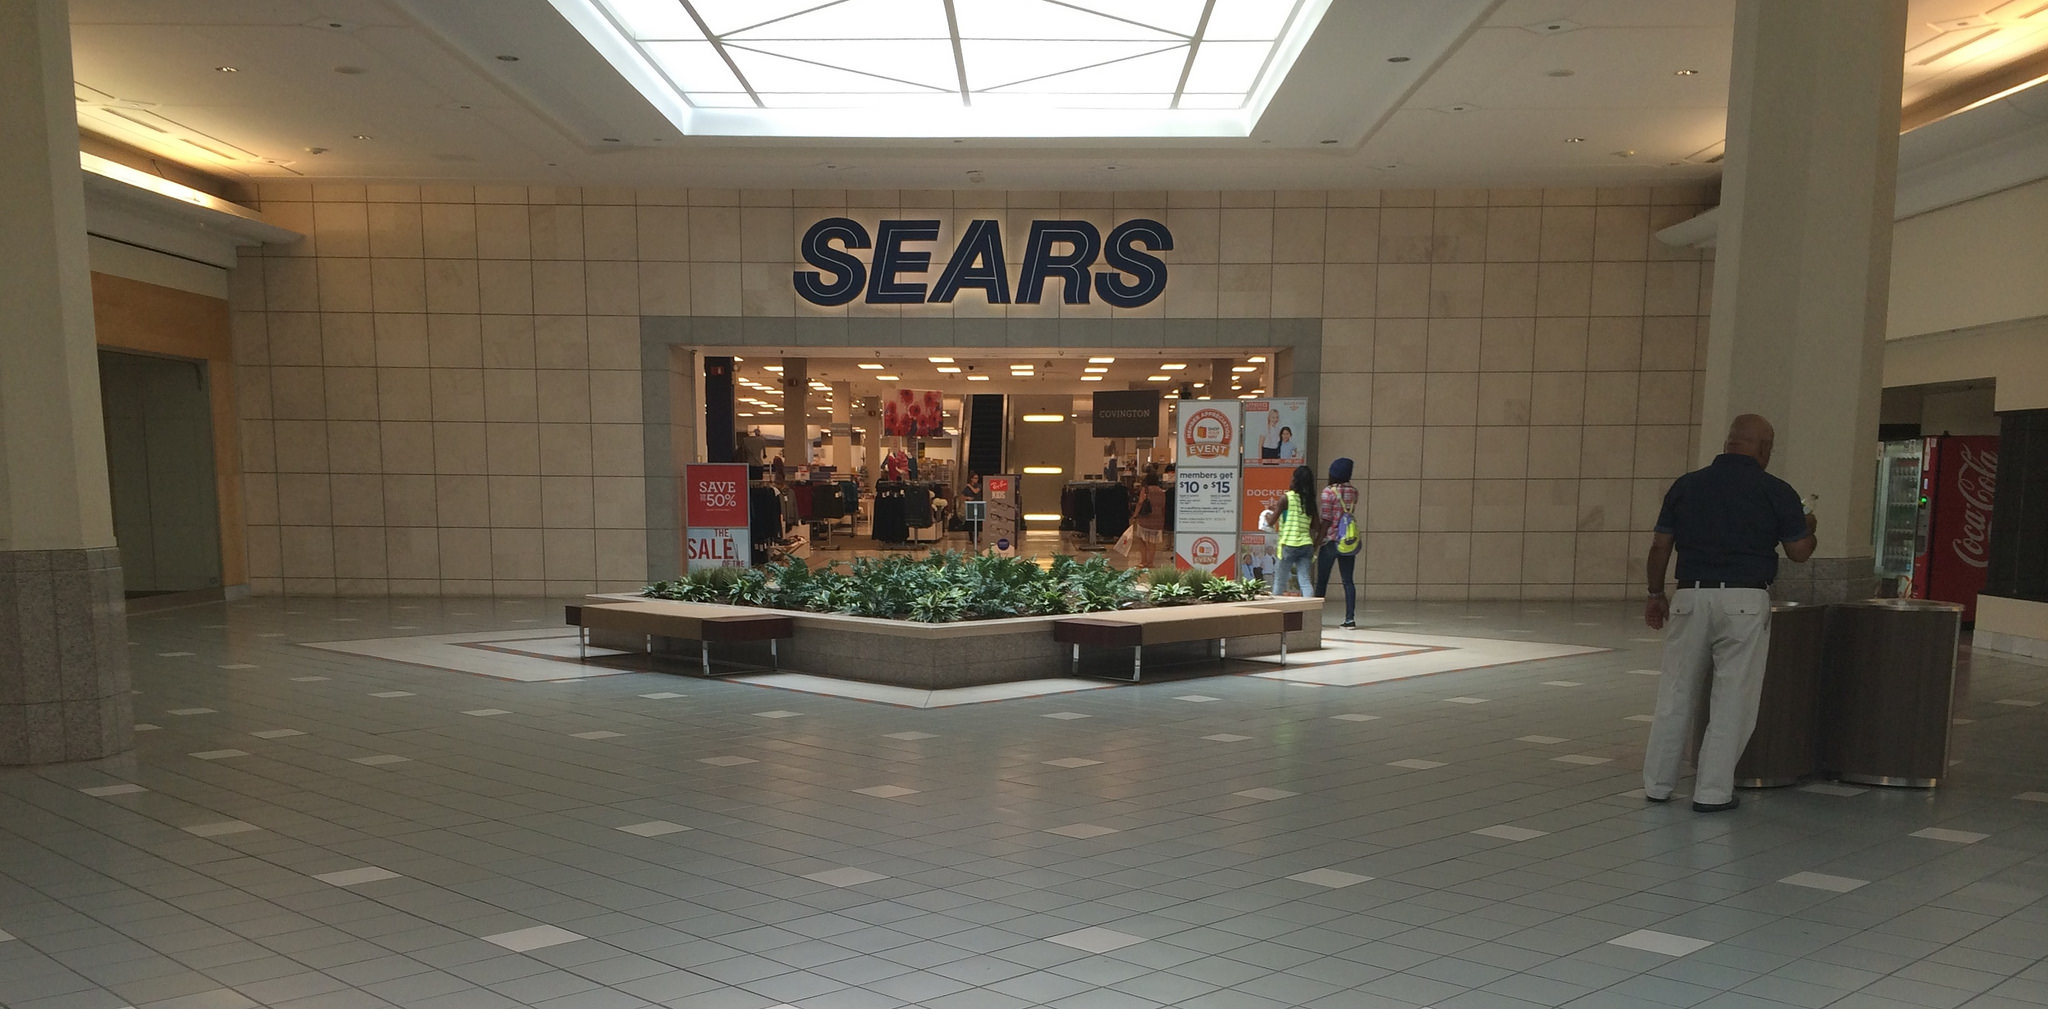 Sears Files For Bankruptcy, Making Another Rift In the Retail Industry